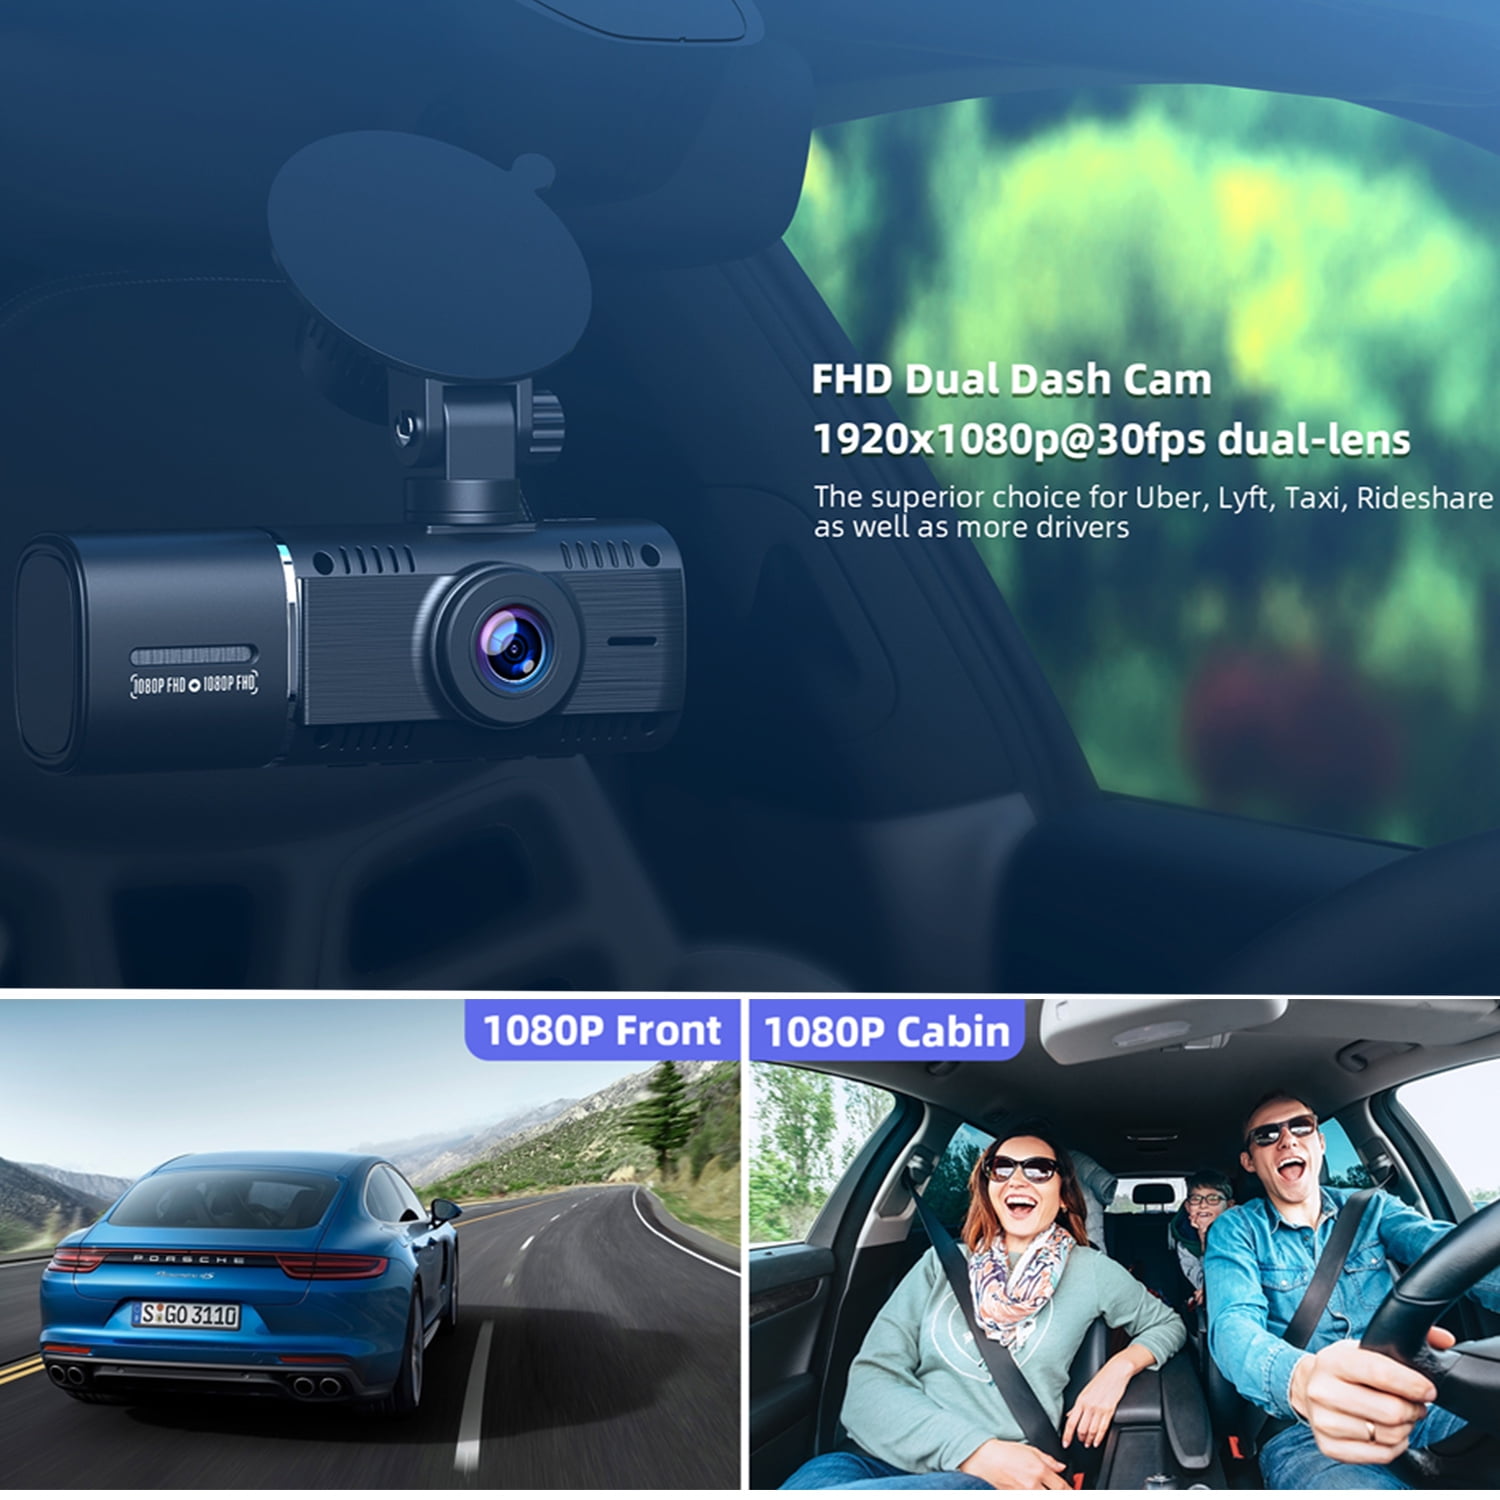 TOGUARD 3 Channel Dash Cam Front and Rear Insidewith 64GB U3 SD Card, 4K  Car Camera Built-in WiFi GPS IR Night Vision Dash Camera with Loop  Recording